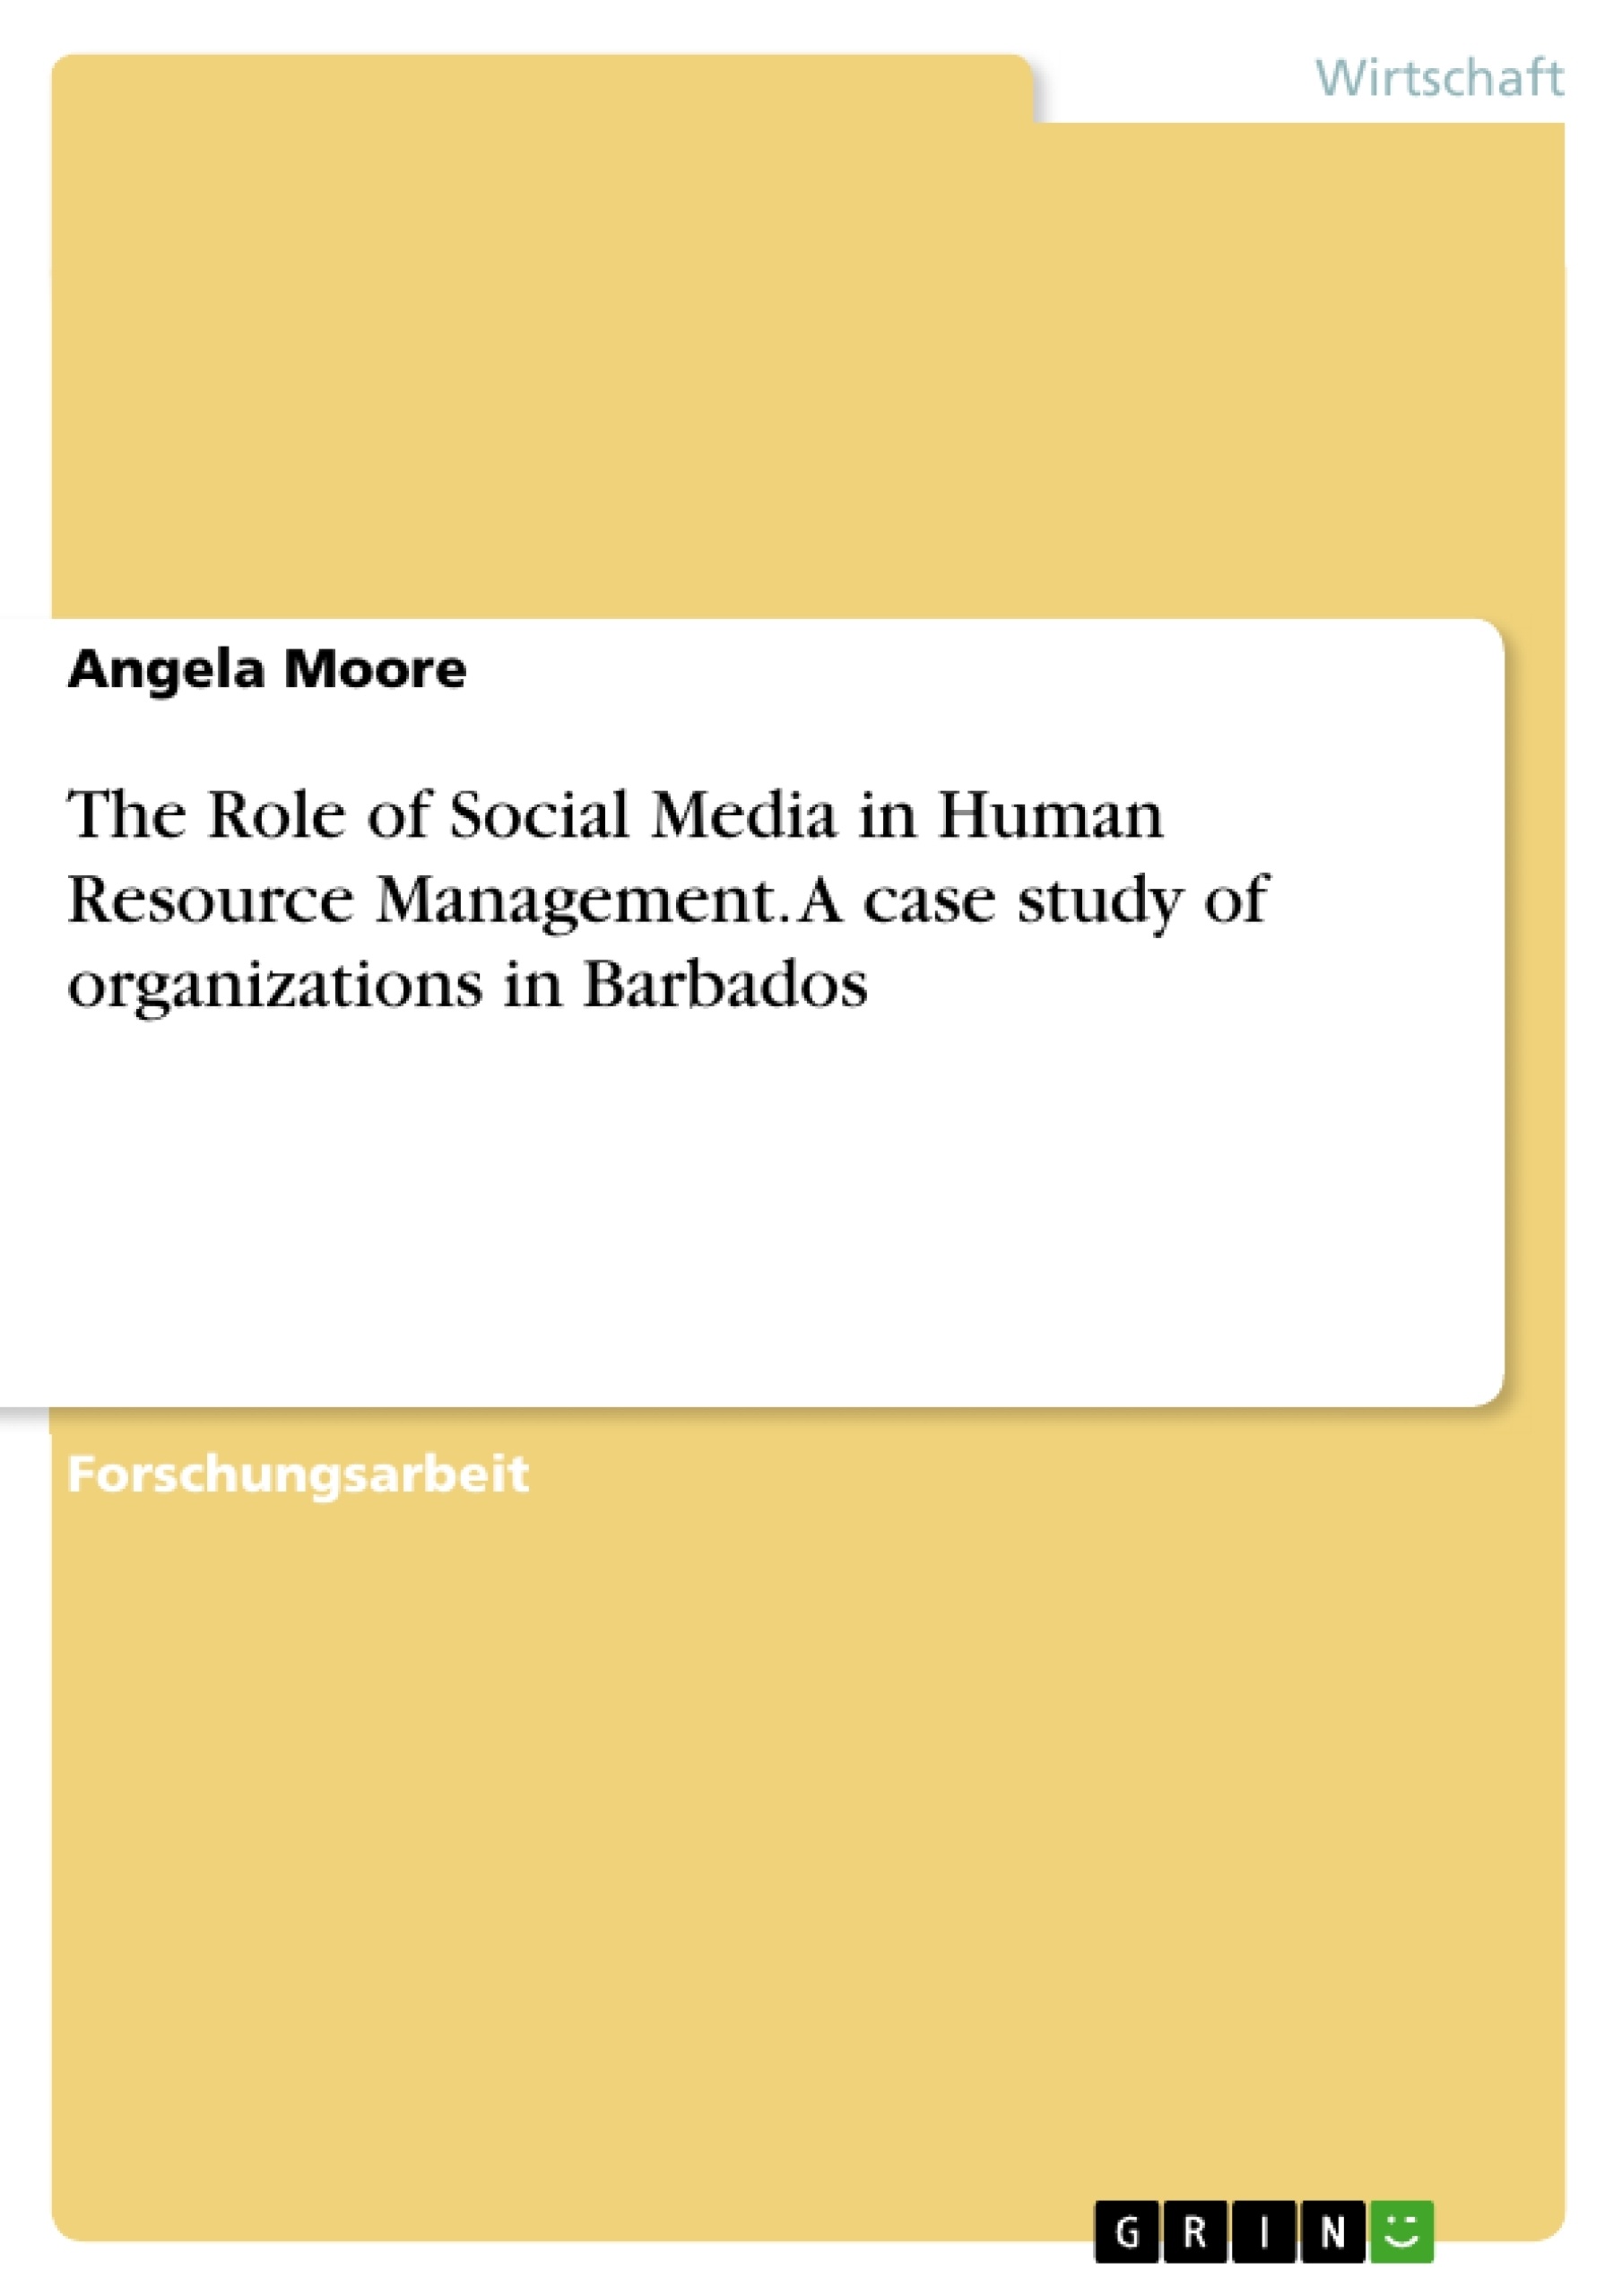 Titre: The Role of Social Media in Human Resource Management. A case study of organizations in Barbados